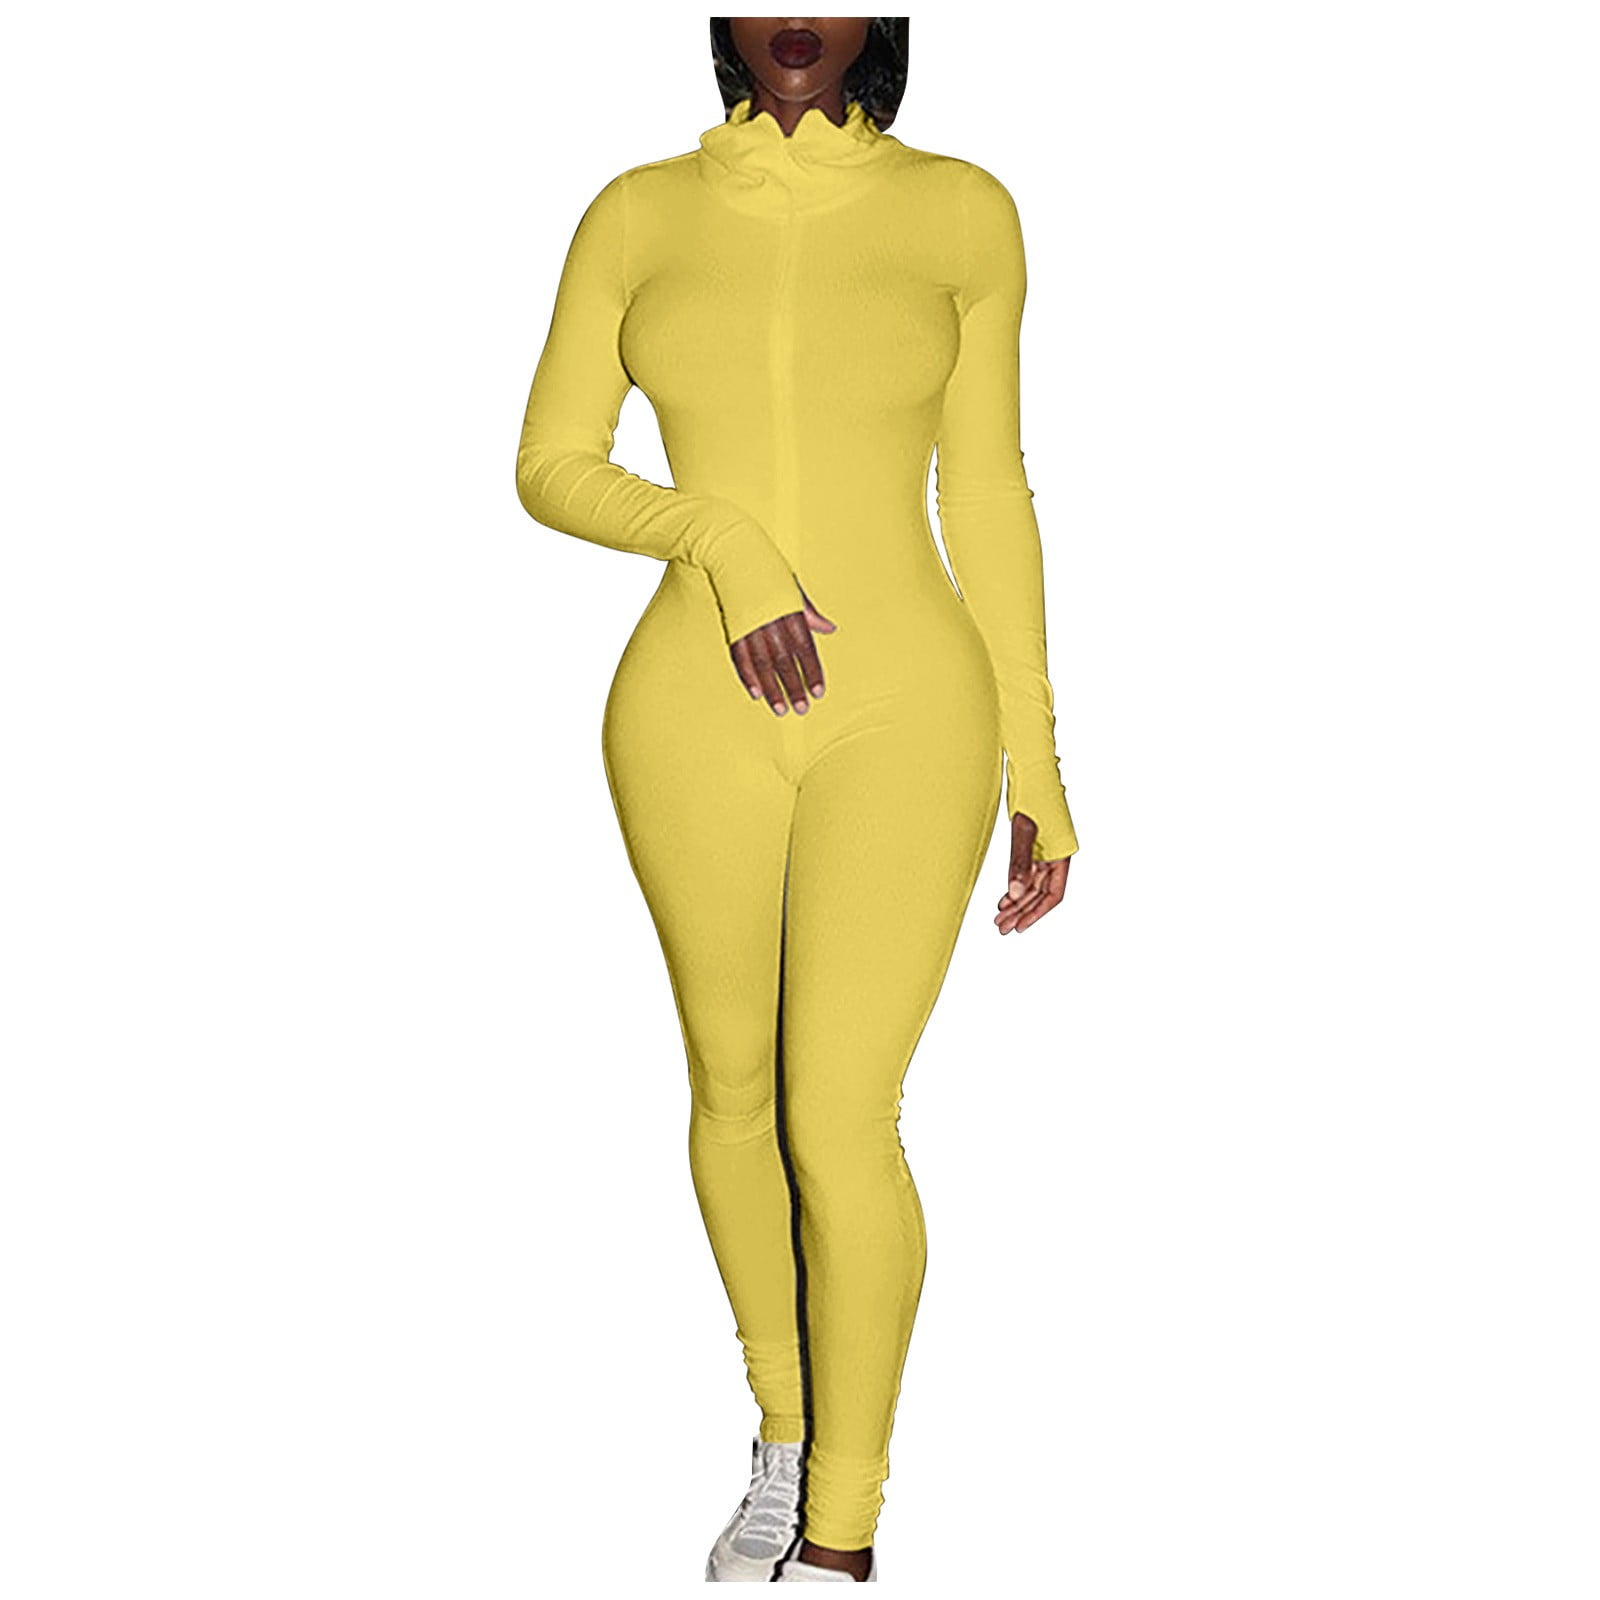 YSEINBH Women's Jumpsuits Solid Color Neck Long Sleeve Casual Bodysuit  Summer Playsuit Romper Overalls Yellow XXL 